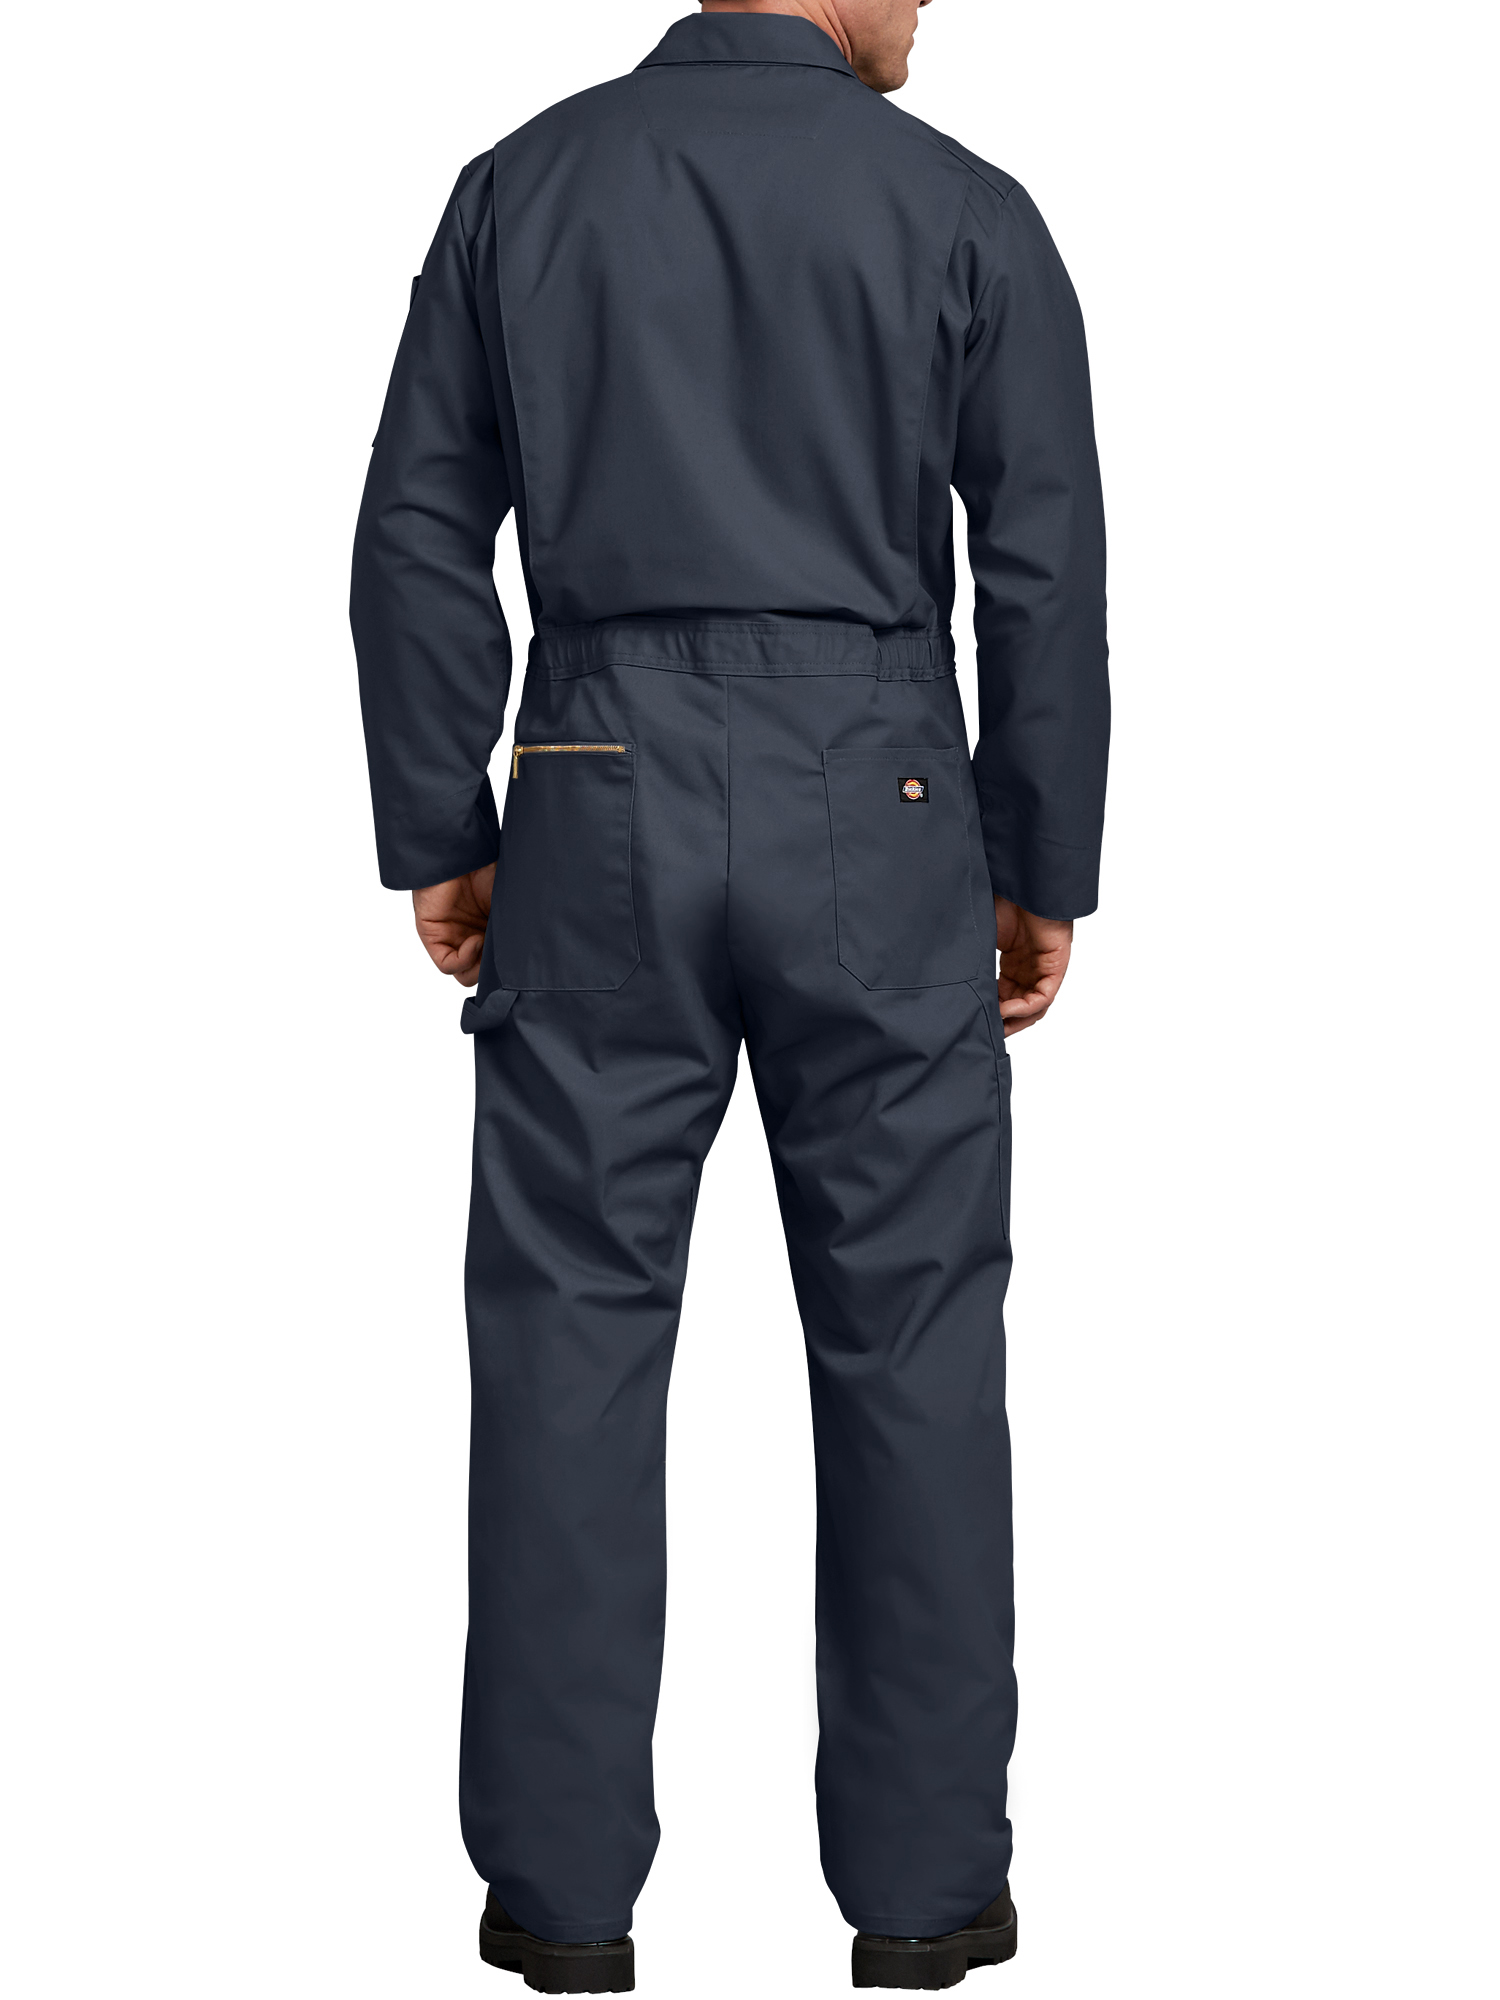 Dickies Mens and Big Mens Deluxe Blended Long Sleeve Coveralls - image 3 of 3